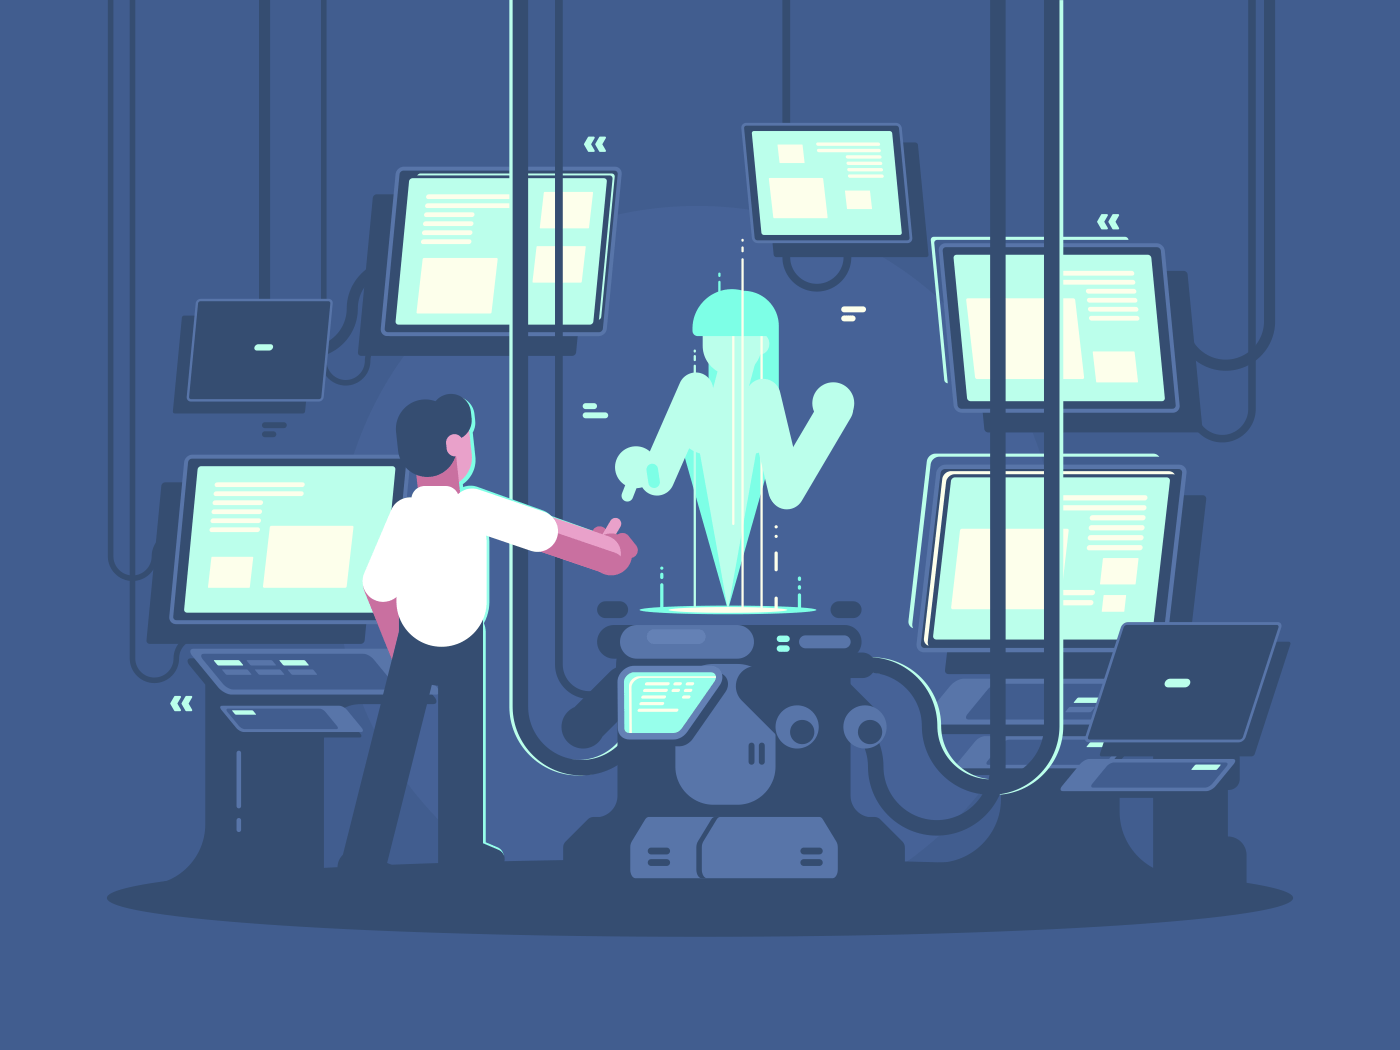 Newest technologies of artificial intelligence. Man communicates with hologram. Vector illustration